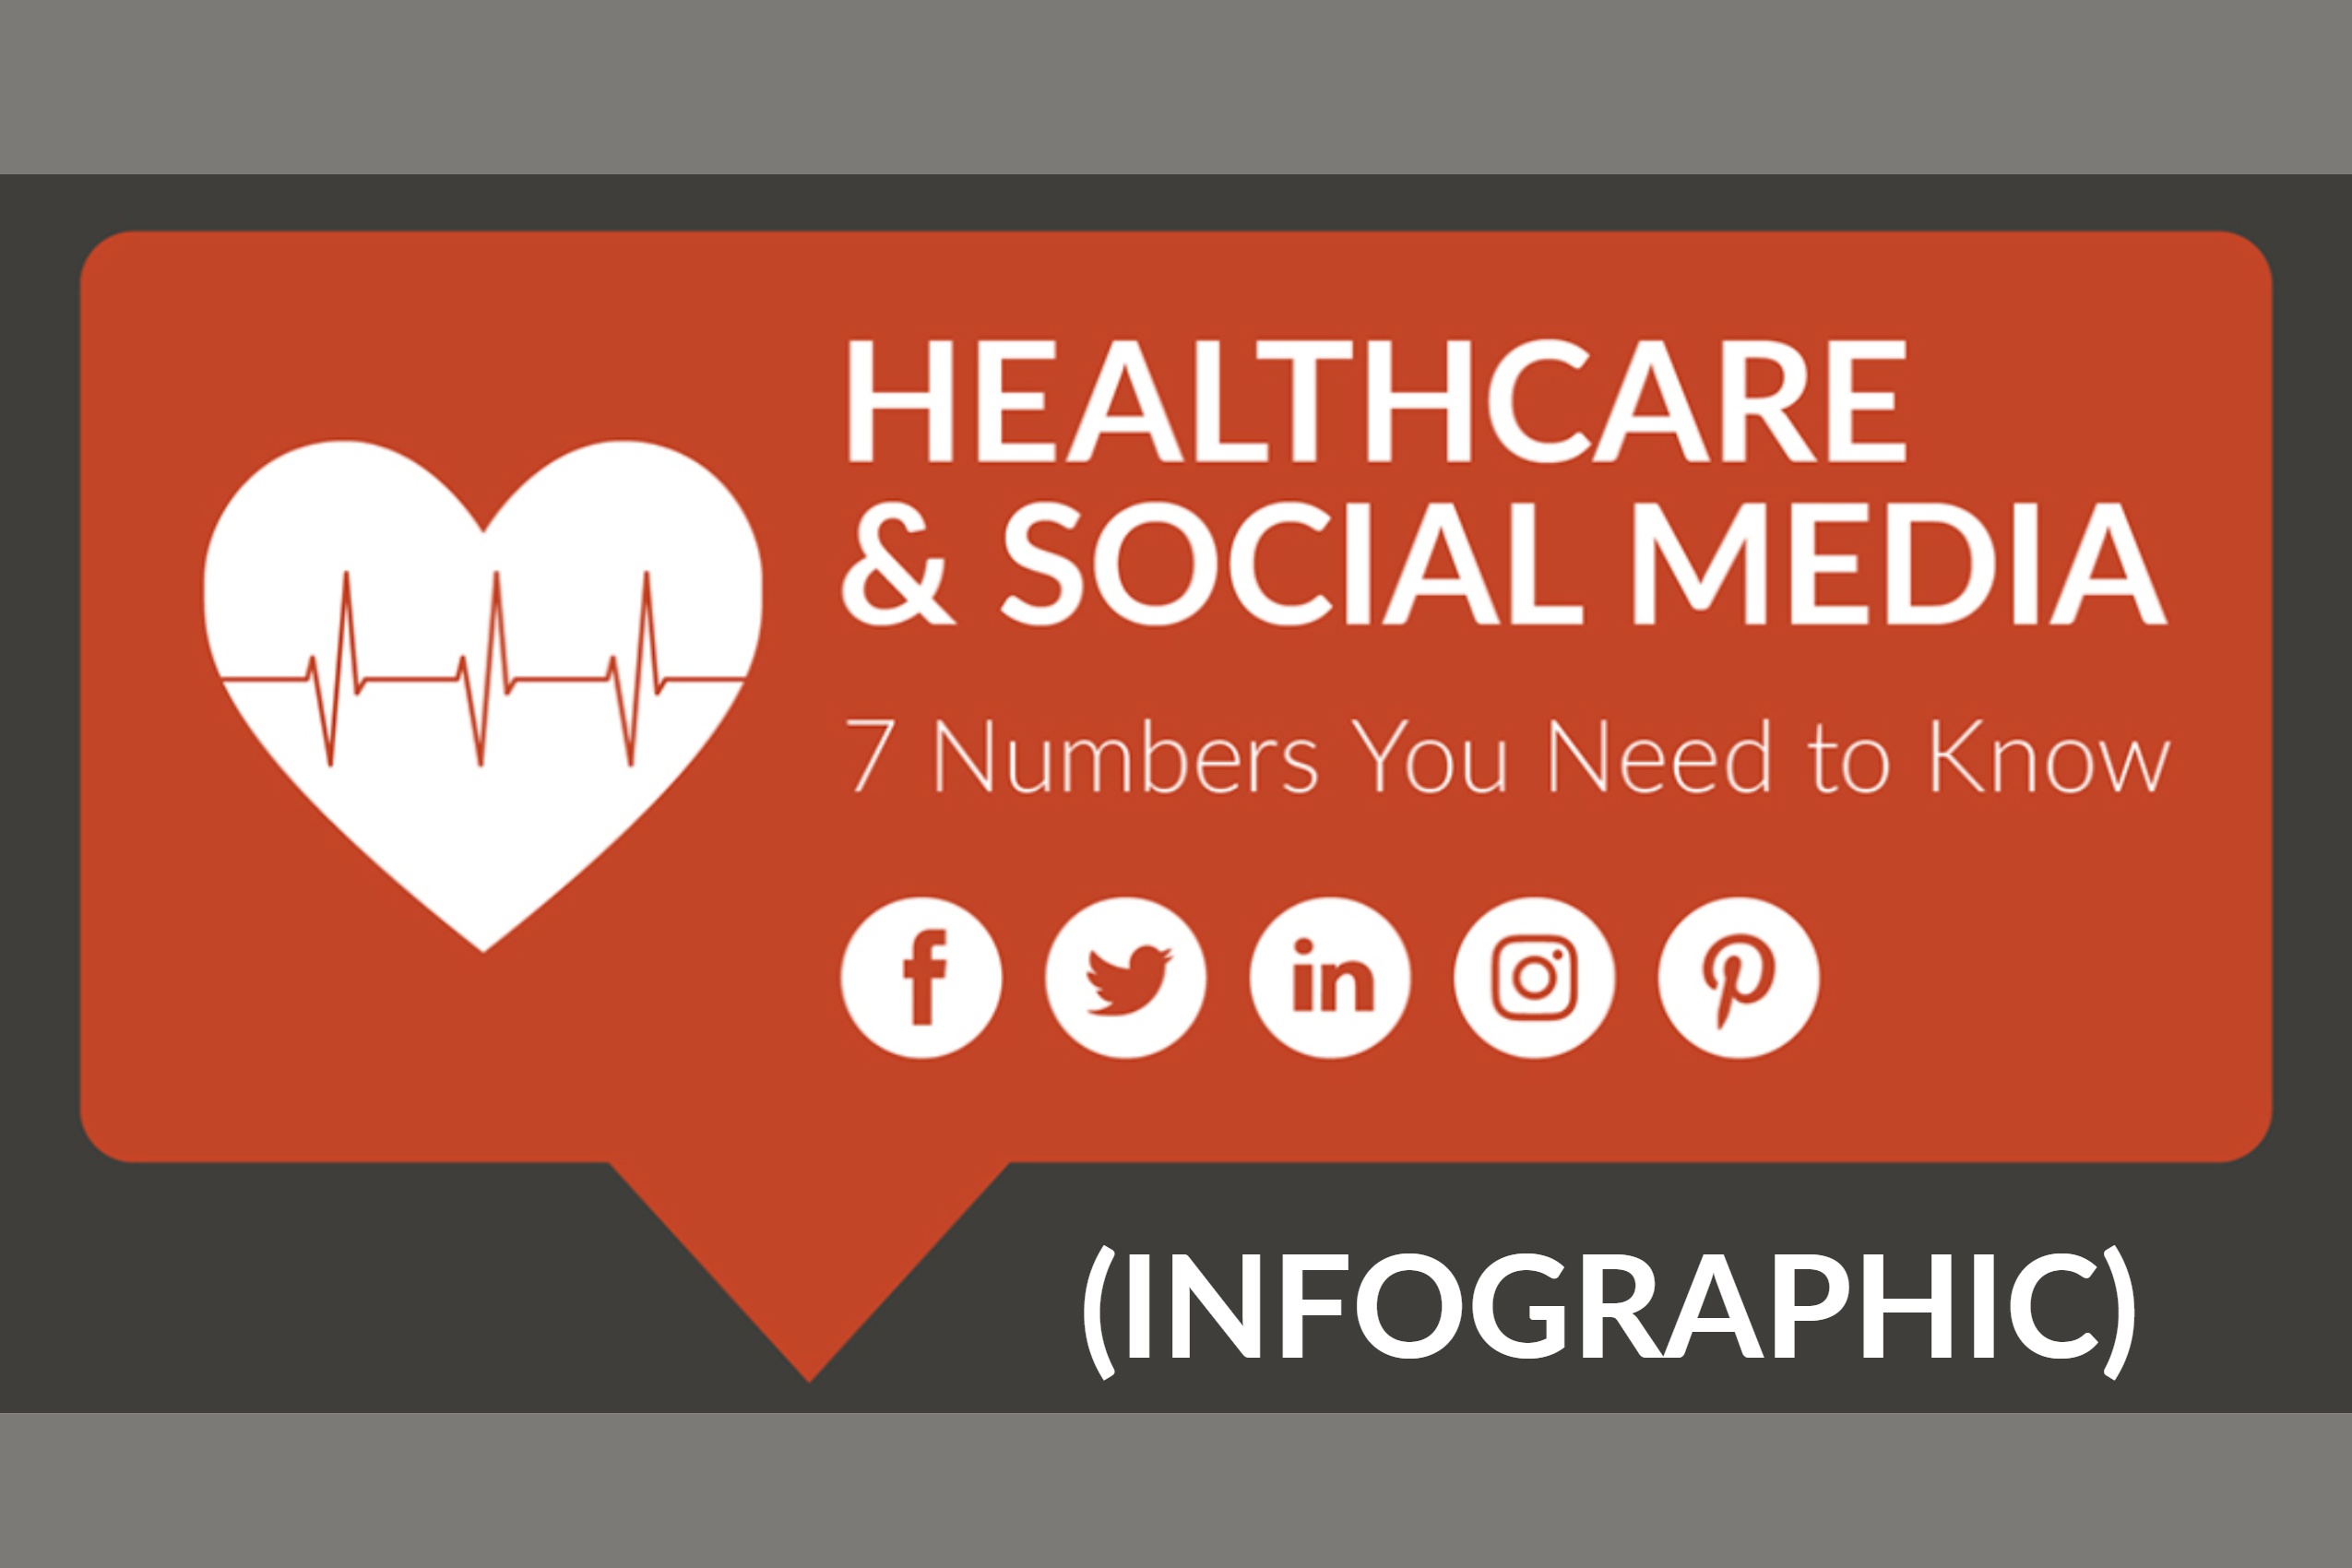 Healthcare & Social Media: 7 Numbers To Know (infographic)